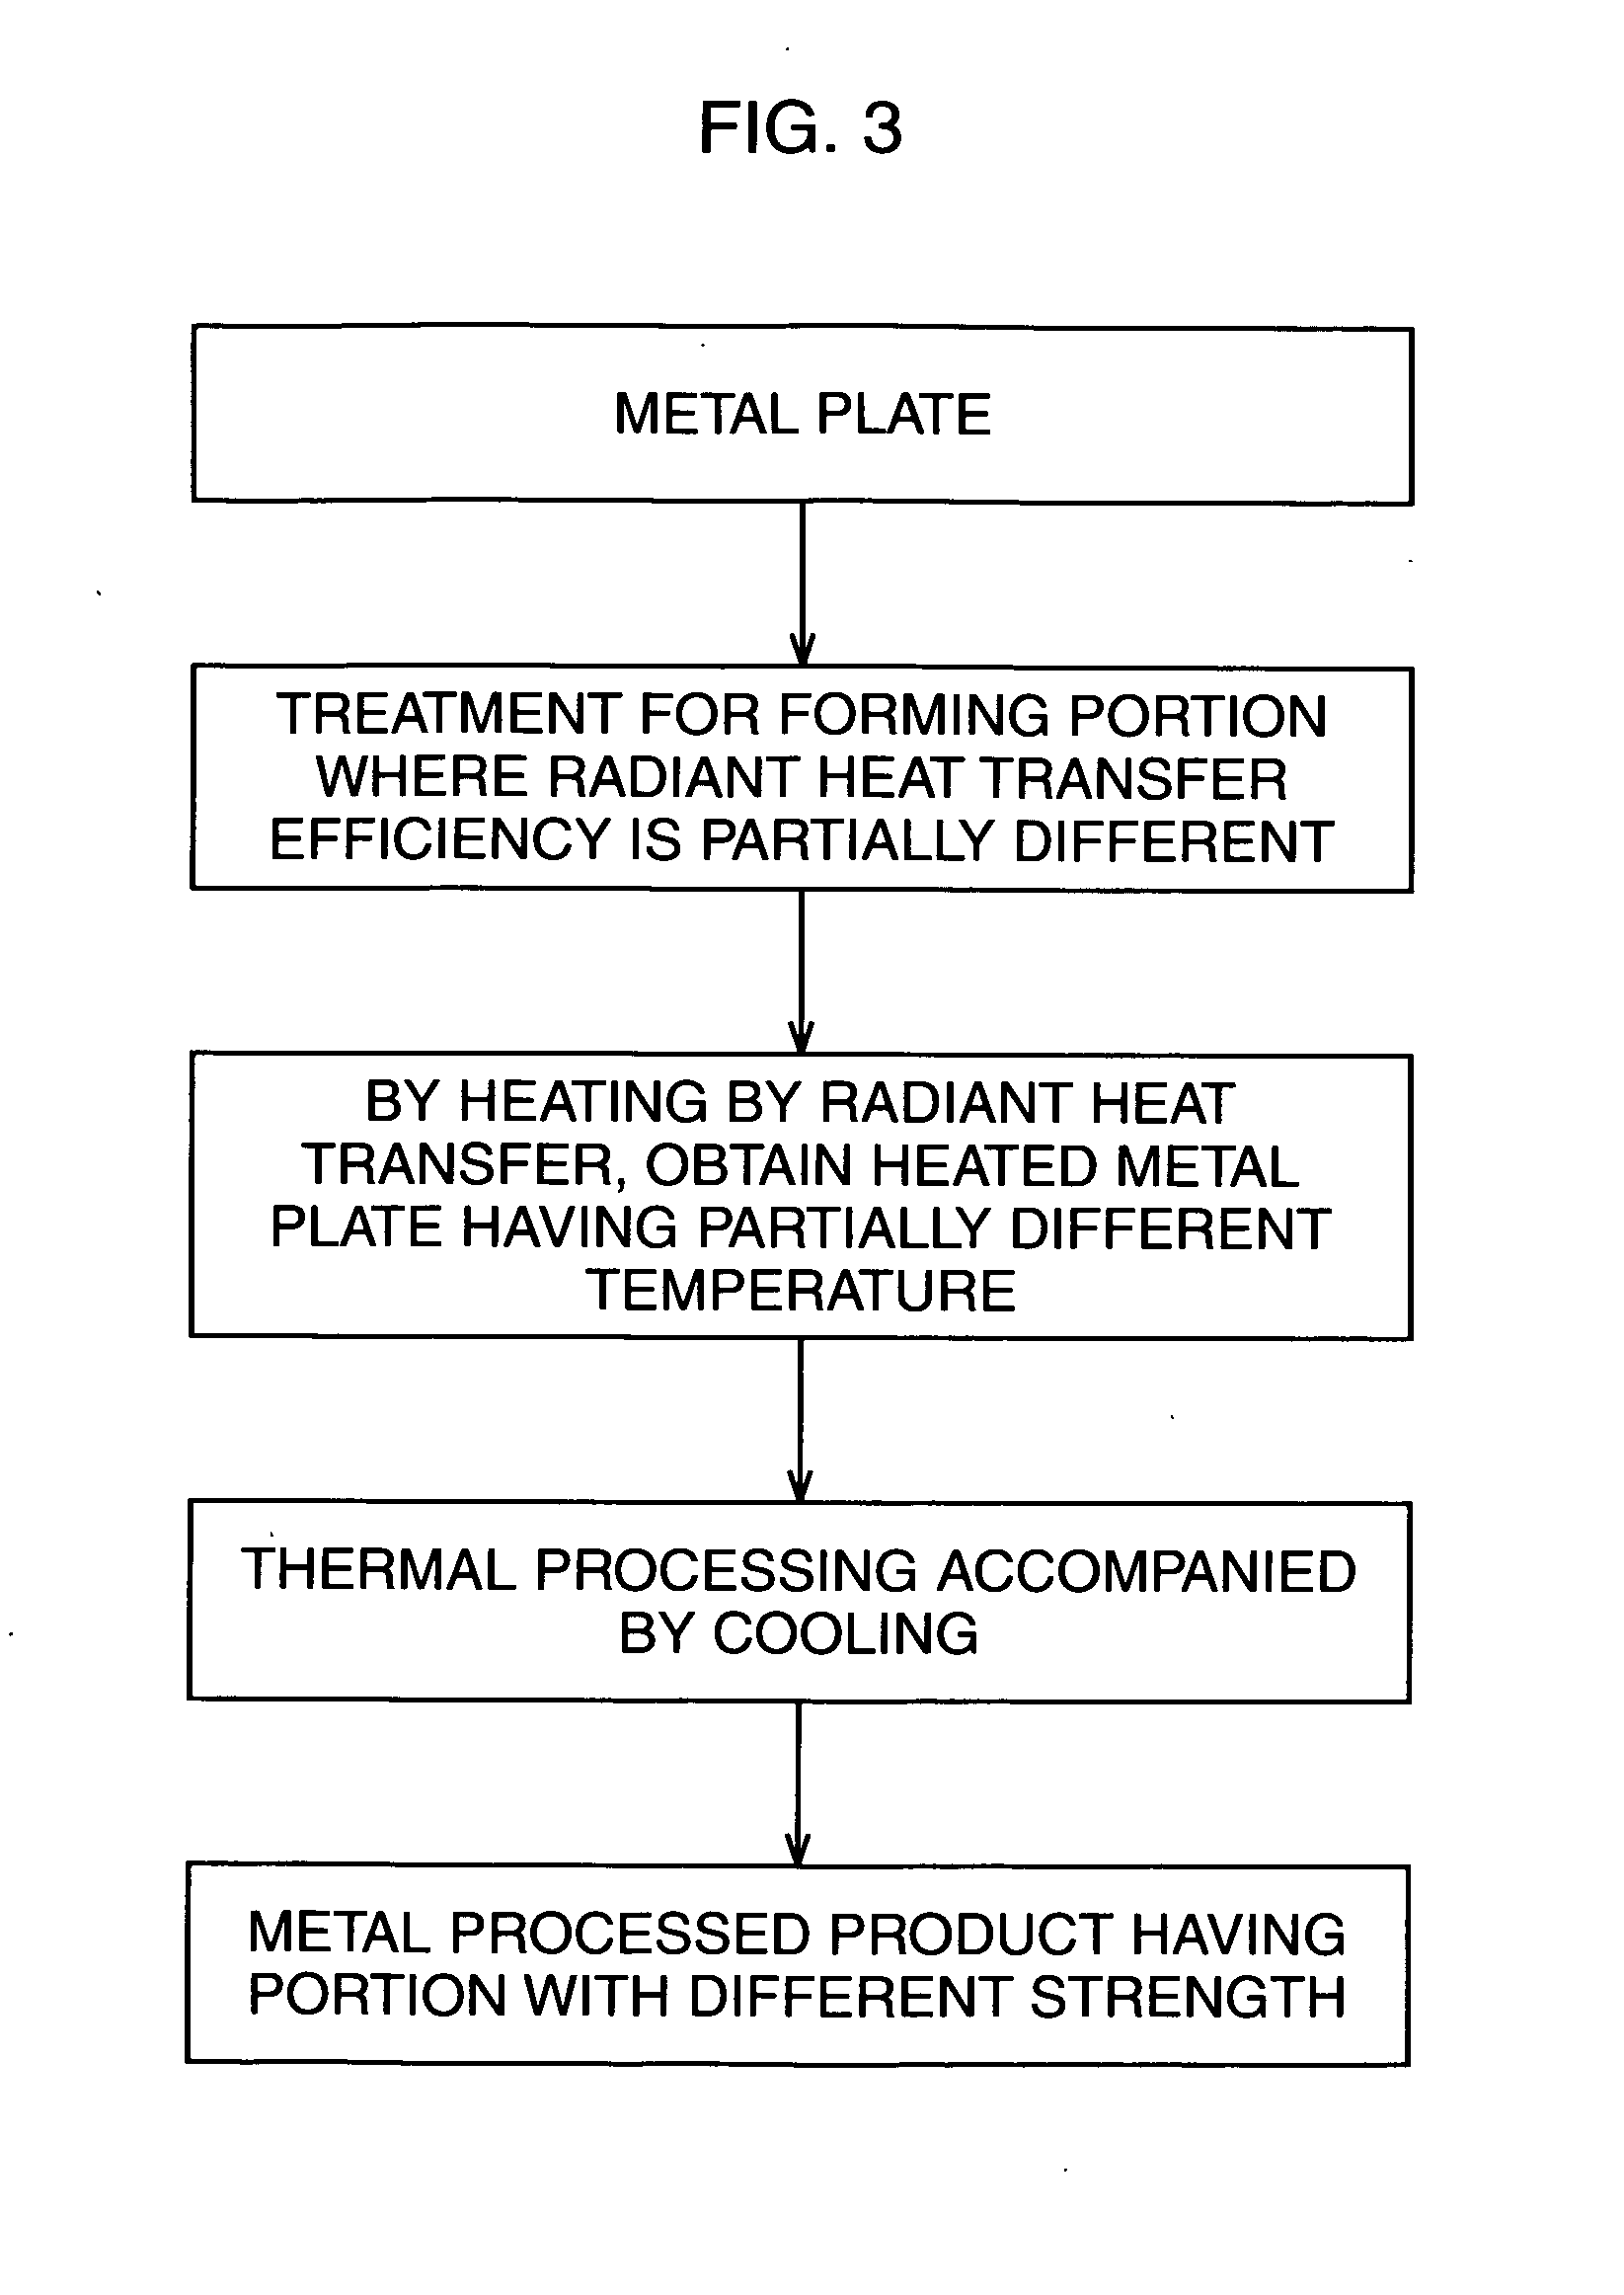 Metal plate to be heated by radiant heat transfer and method of manufacturing the same, and metal processed product having portion with different strength and method of manufacturing the same